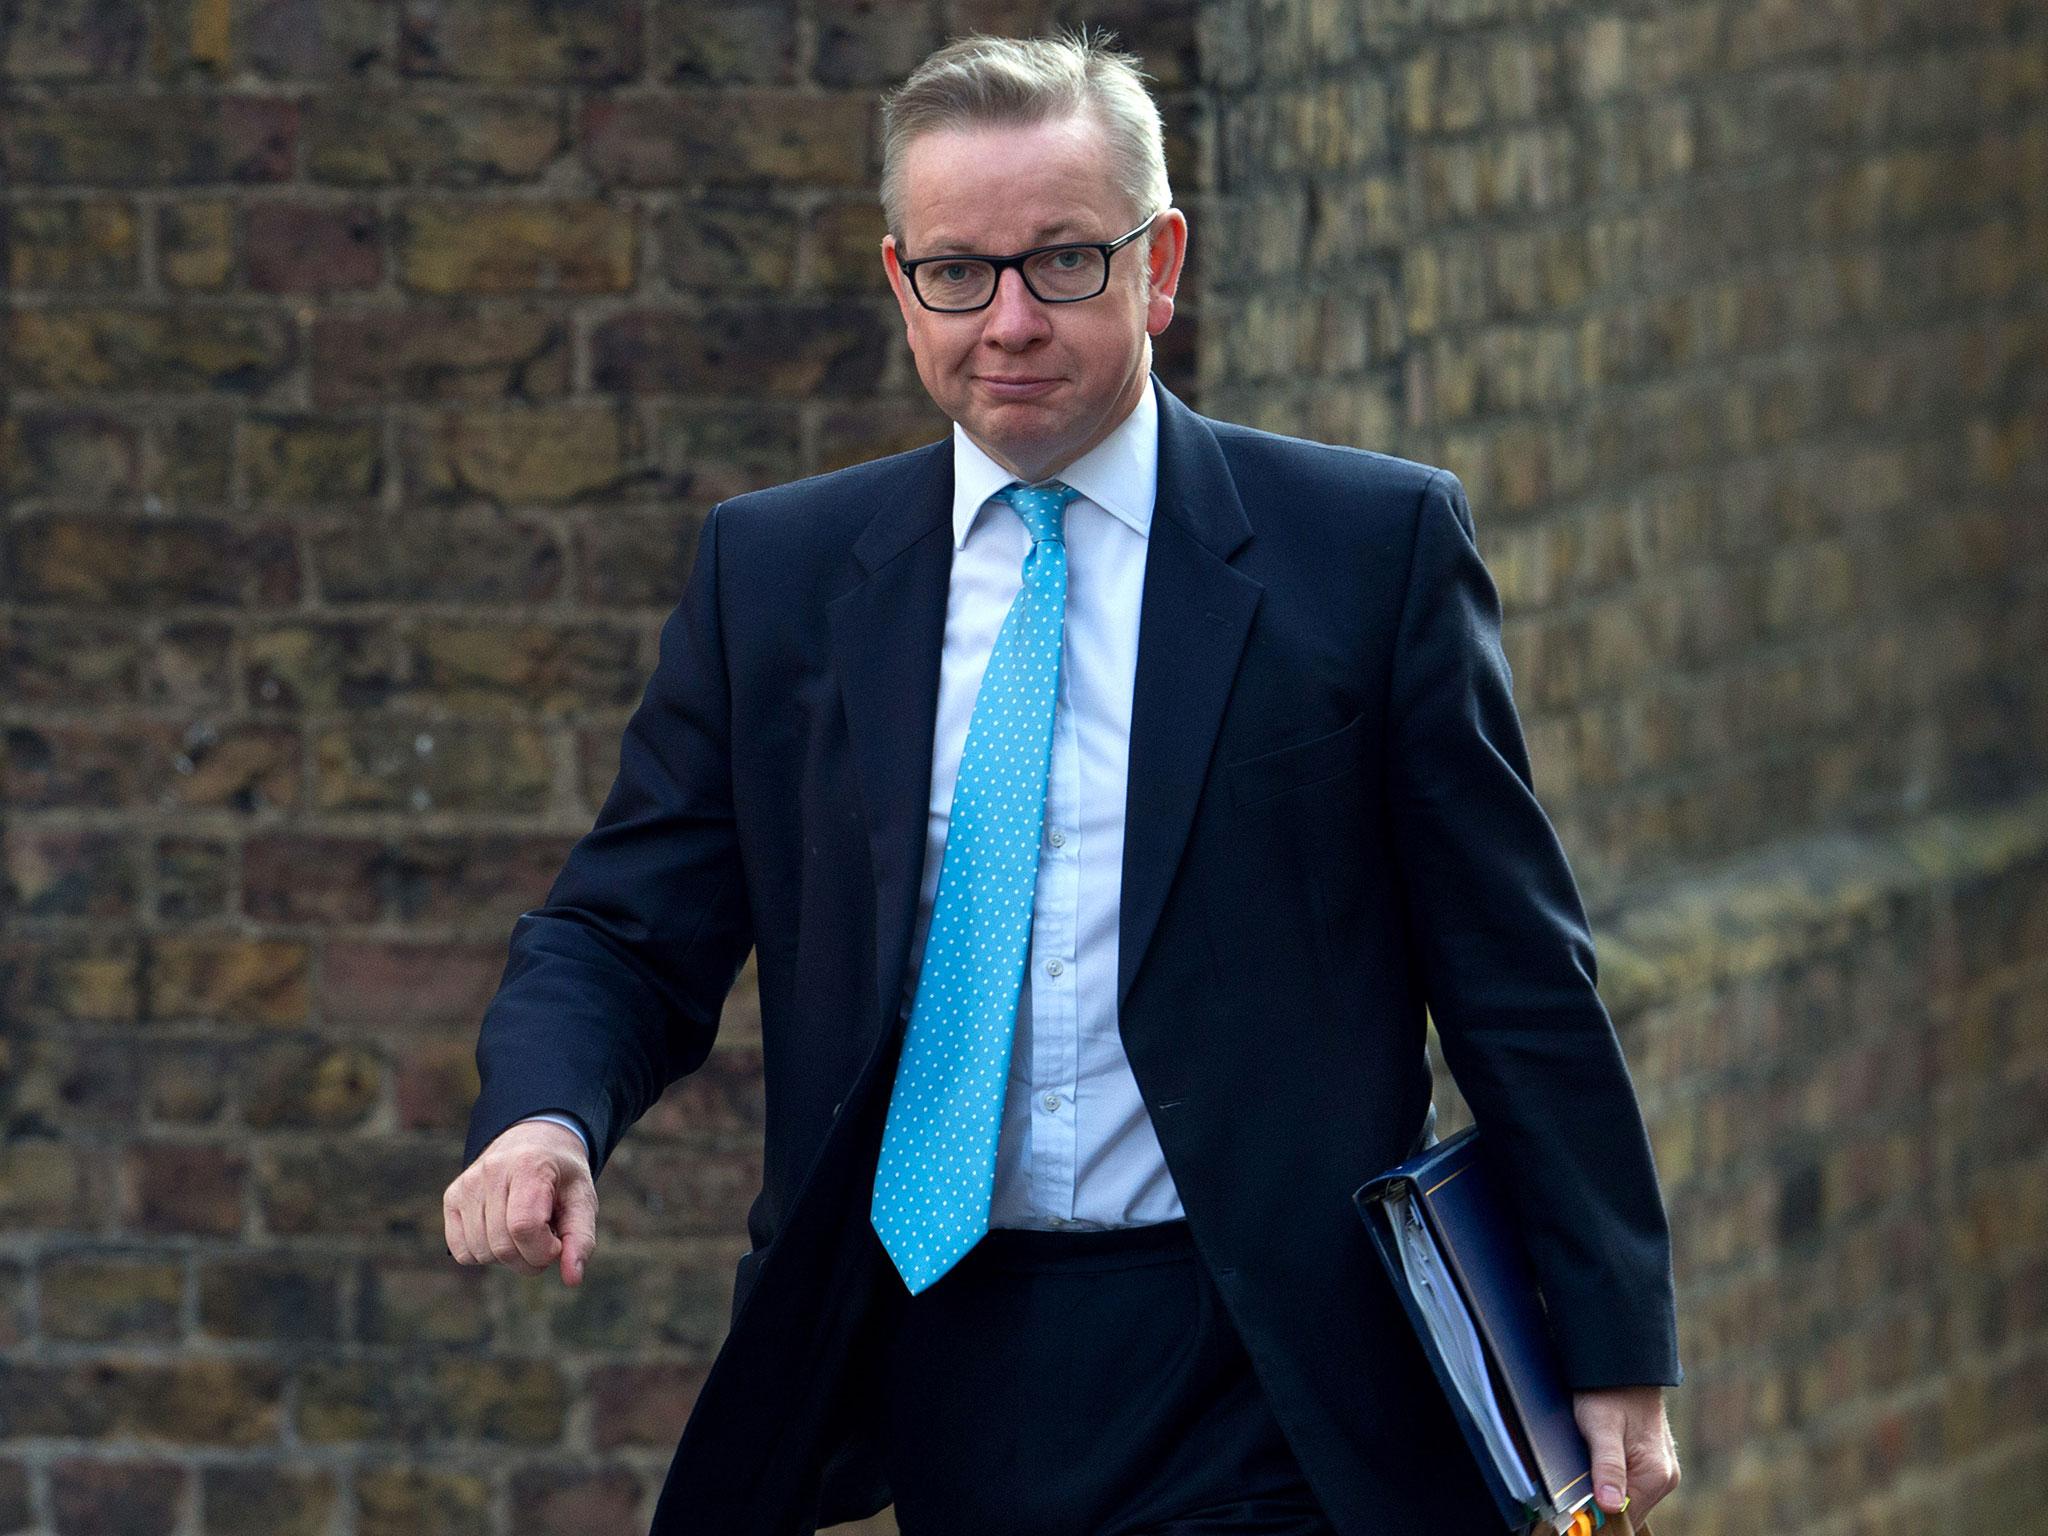 Michael Gove shocked fellow Conservatives by announcing his decision to stand in the party leadership race on Thursday, he had been expected to back Boris Johnson